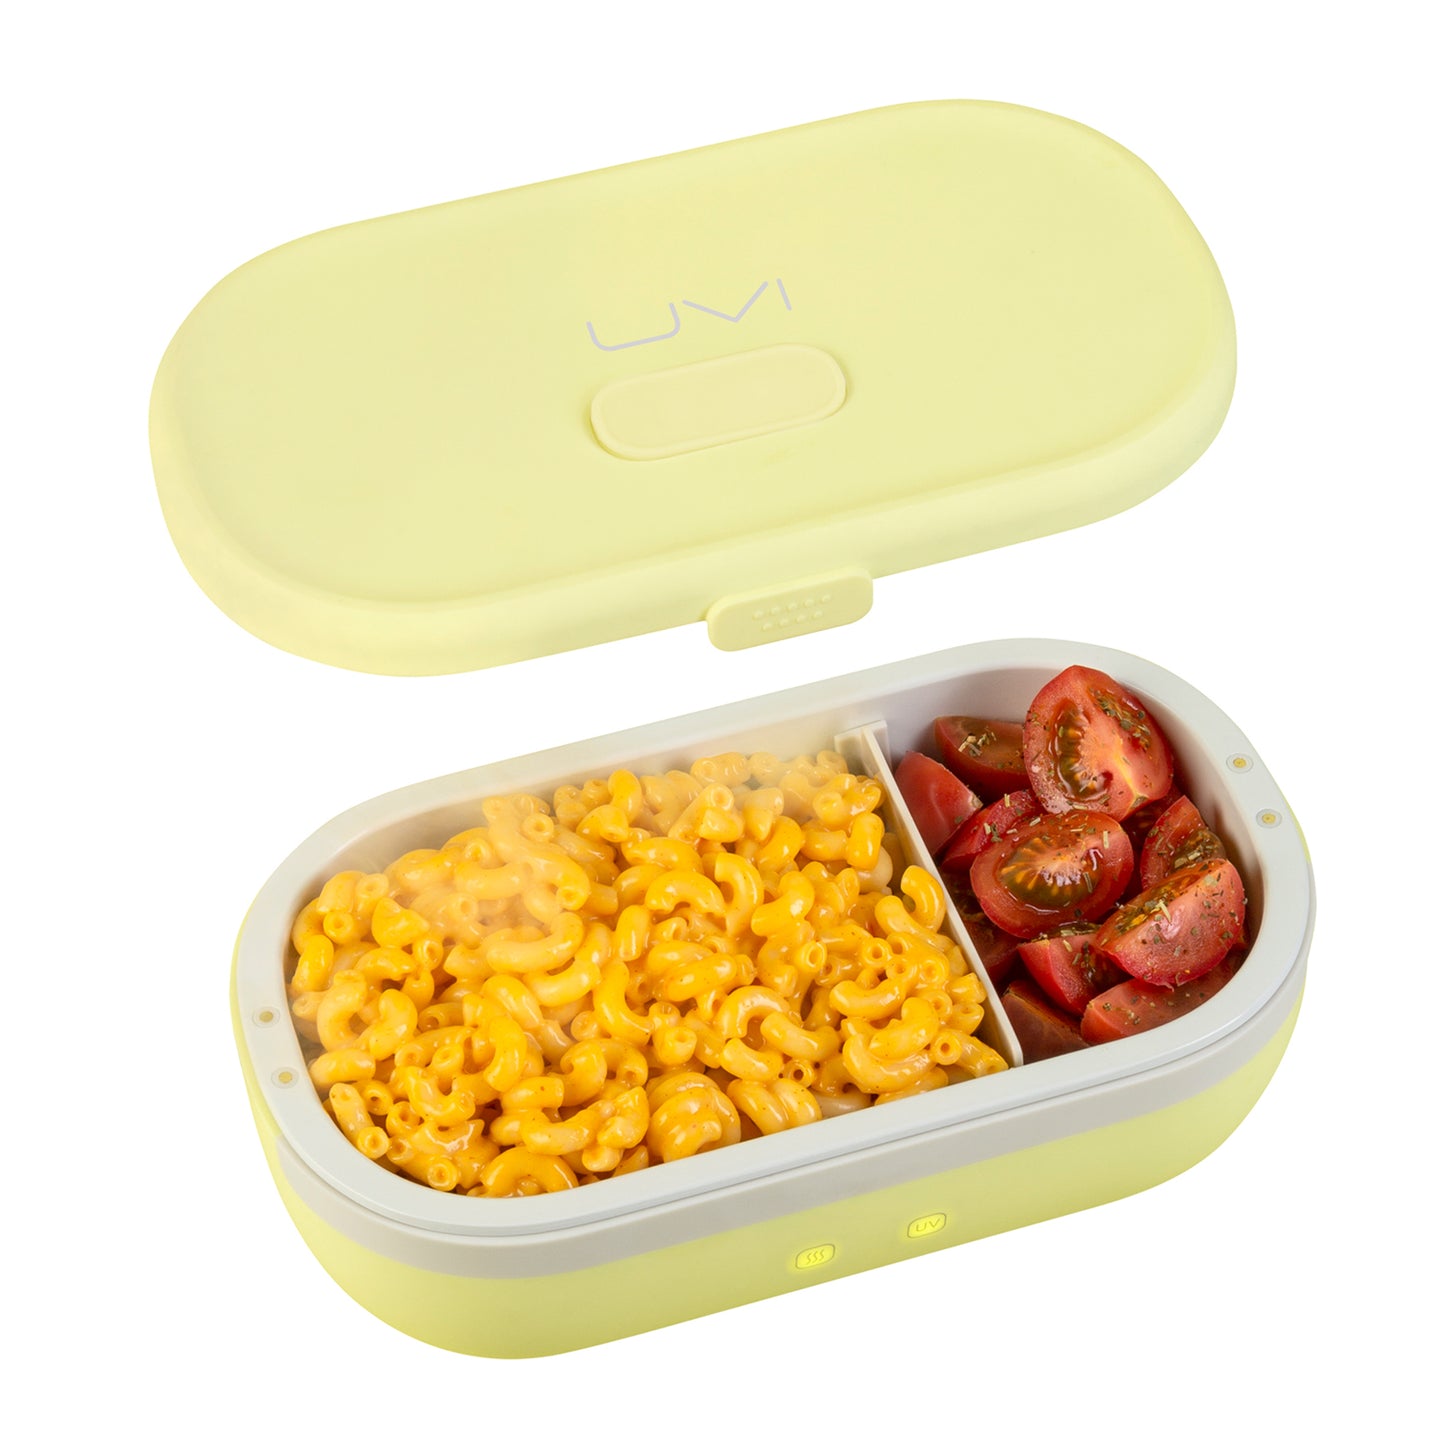 SELF HEATING LUNCH BOX WITH UV LIGHT SANITIZER - YELLOW